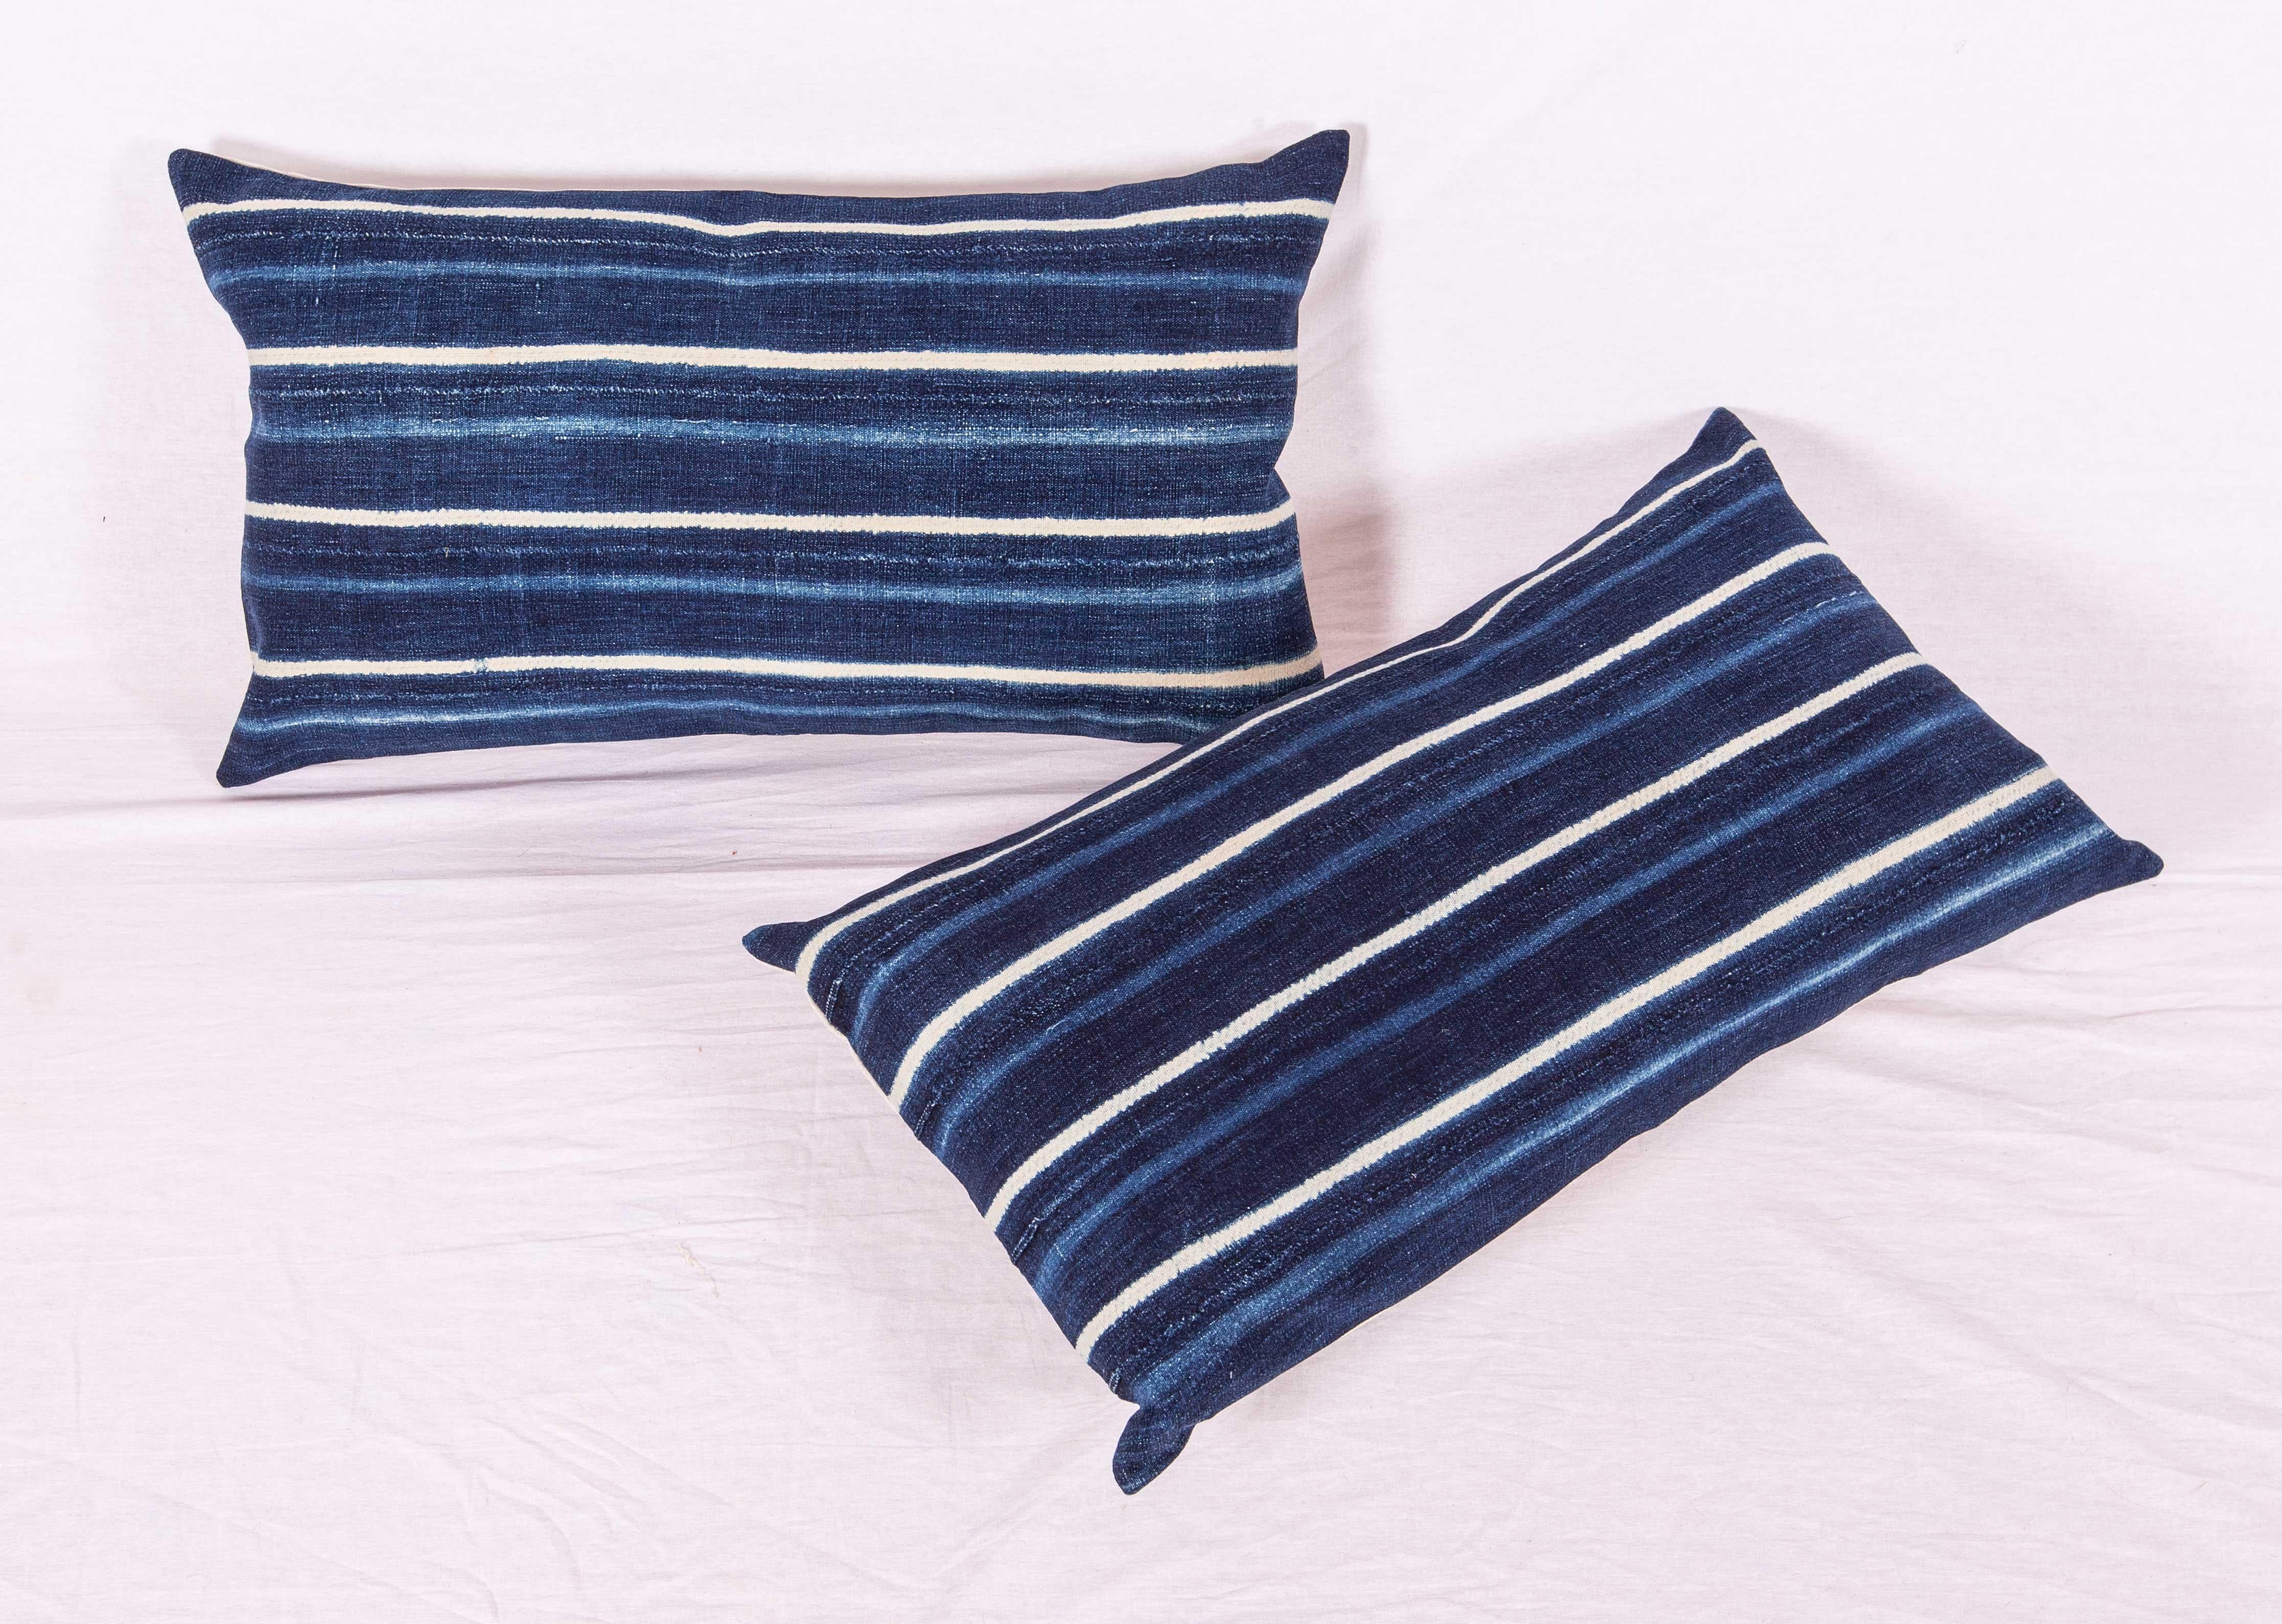 Malian Vintage Indigo Pillow / Cushion Covers Fashioned from a Cloth from Mali Africa